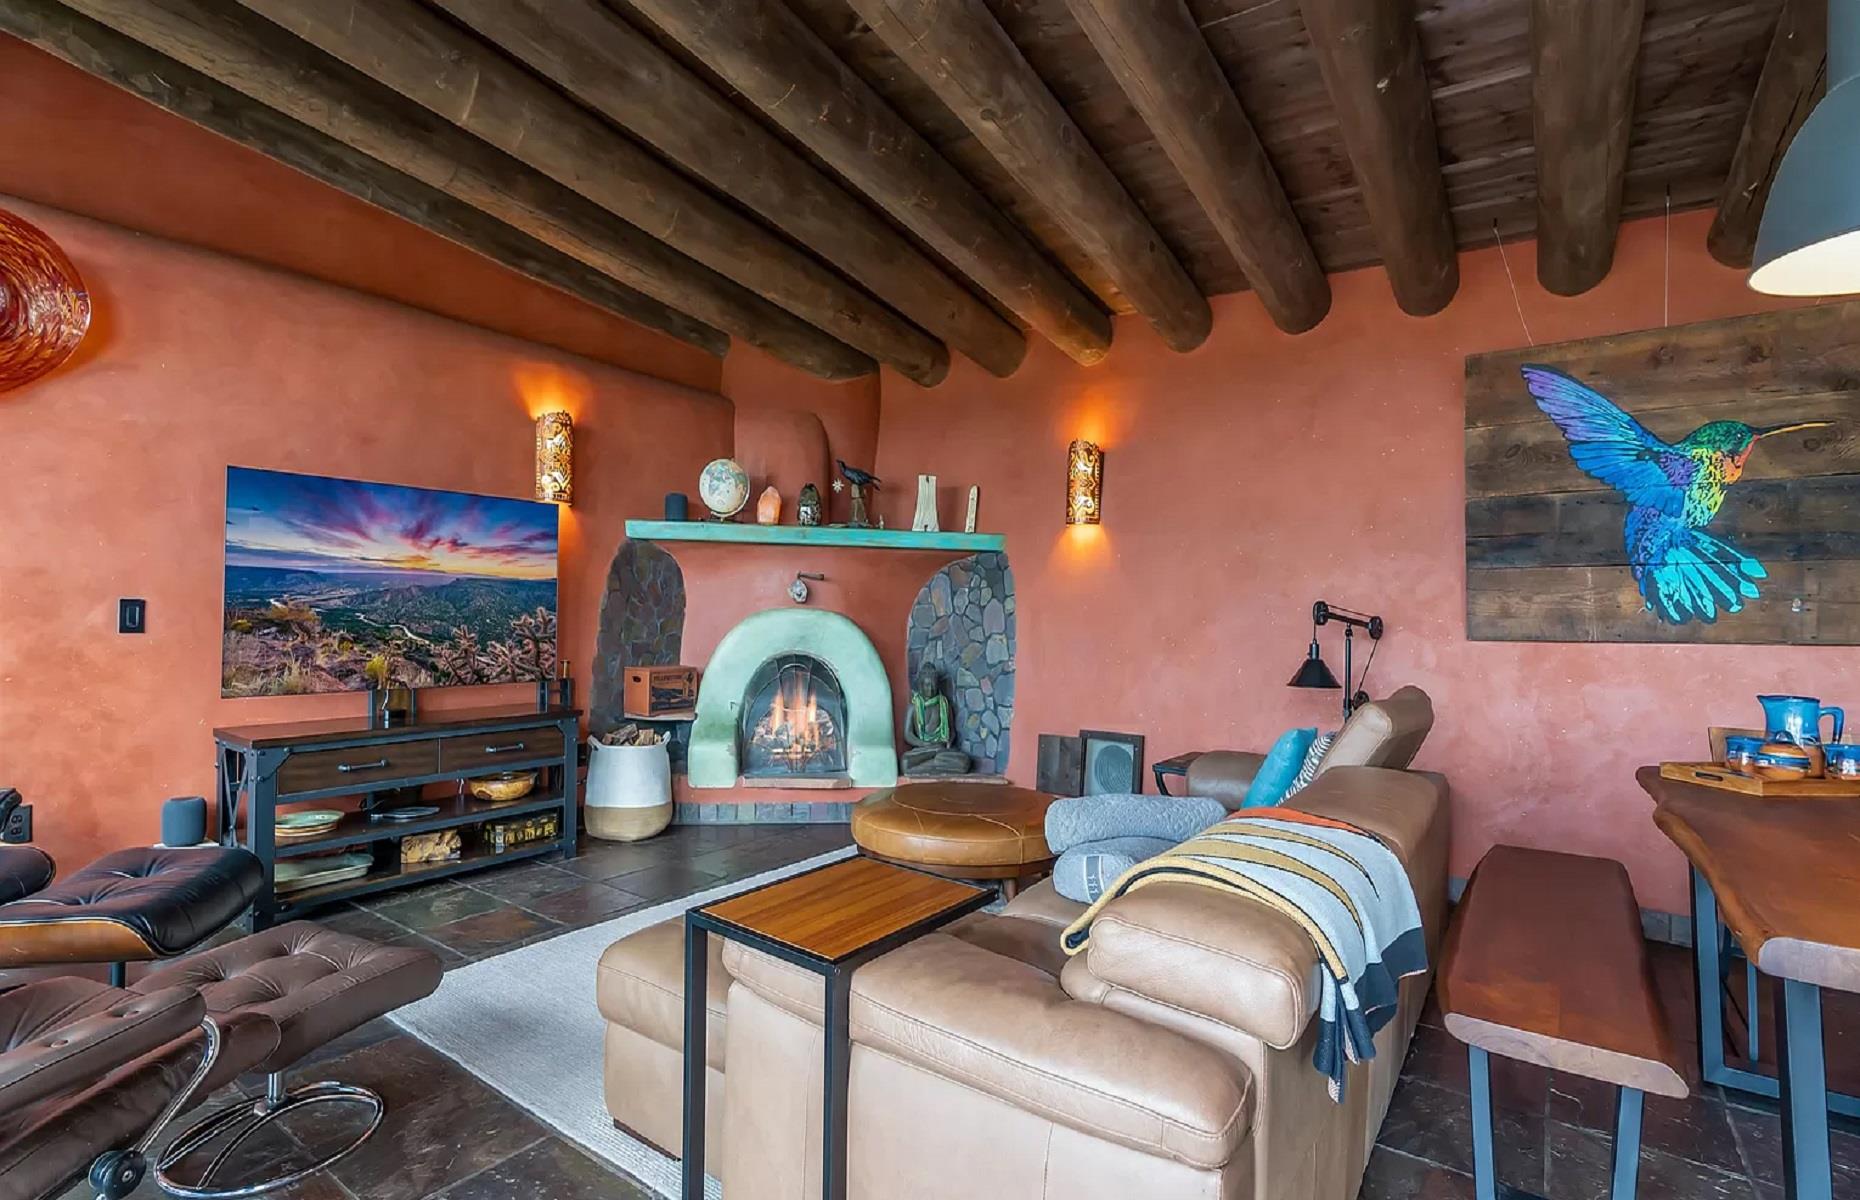 <p>According to the listing agent, <a href="https://www.bhhsnmproperties.com/nm/27-earthship-way-tres-piedras-87577/pid-335835886?SearchType=Address&PropertyType=1%2C2&ApplicationType=FOR_SALE&ListingStatus=1&NewListing=false&PageSize=32&Page=1">Berkshire Hathaway</a>, the property is the "luxury crown and pinnacle of Mike Reynolds’ 50+ years of Earthship evolution", meaning this pad isn't just cool, it's iconic. The incredible Earthship was custom designed and is environmentally friendly, sustainable, and off-grid, yet boasts all the modern amenities and comforts of a luxury new build.</p>